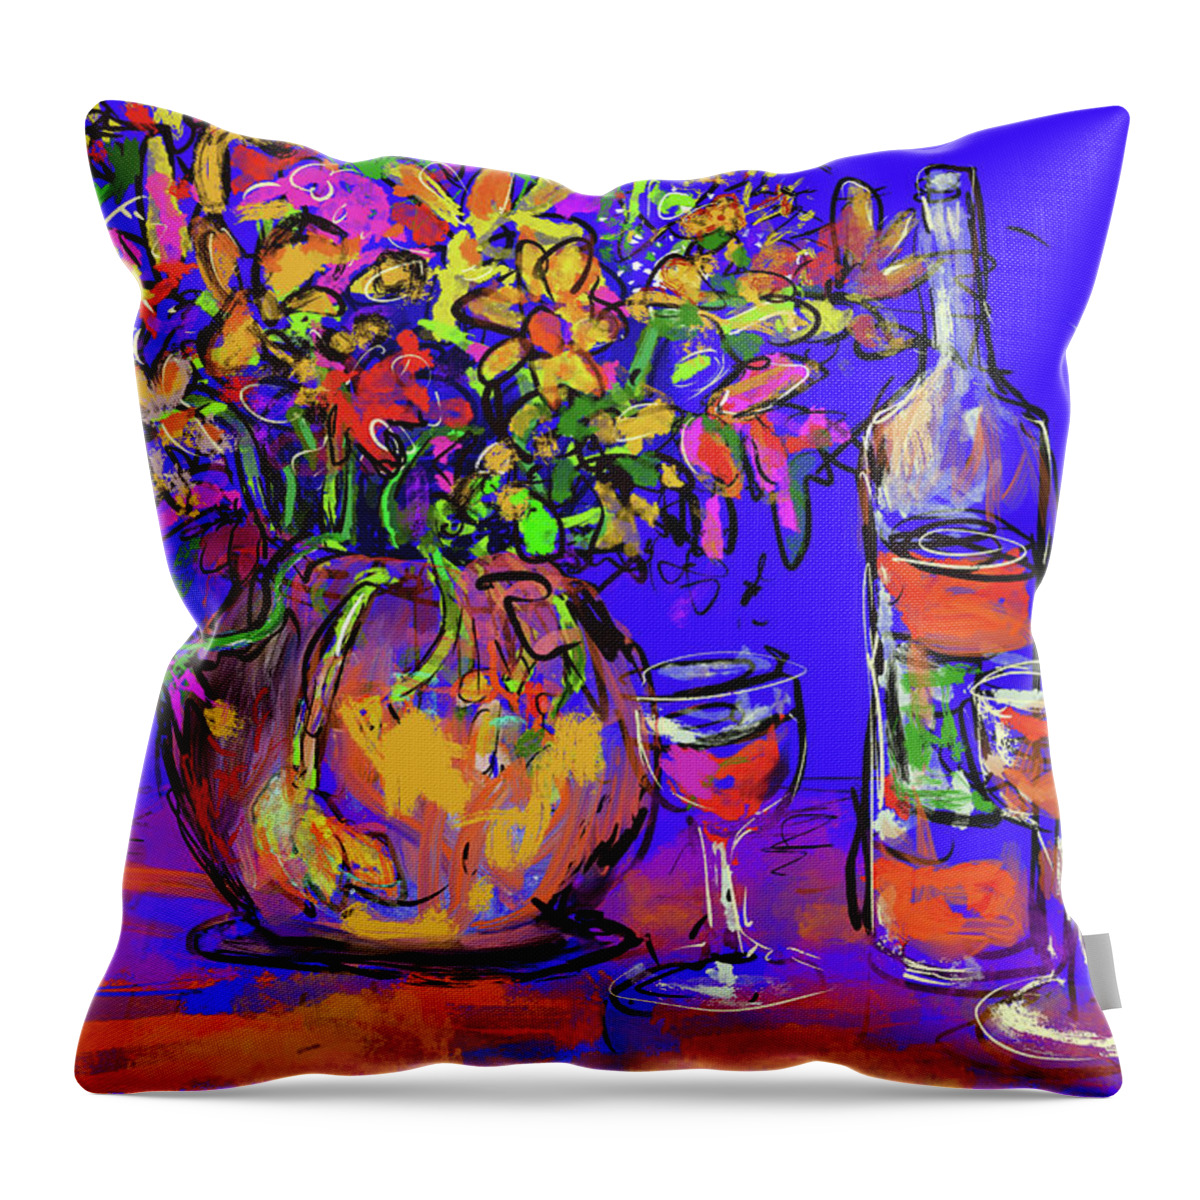 Blue Throw Pillow featuring the digital art Flowers and wine by Jeremy Holton